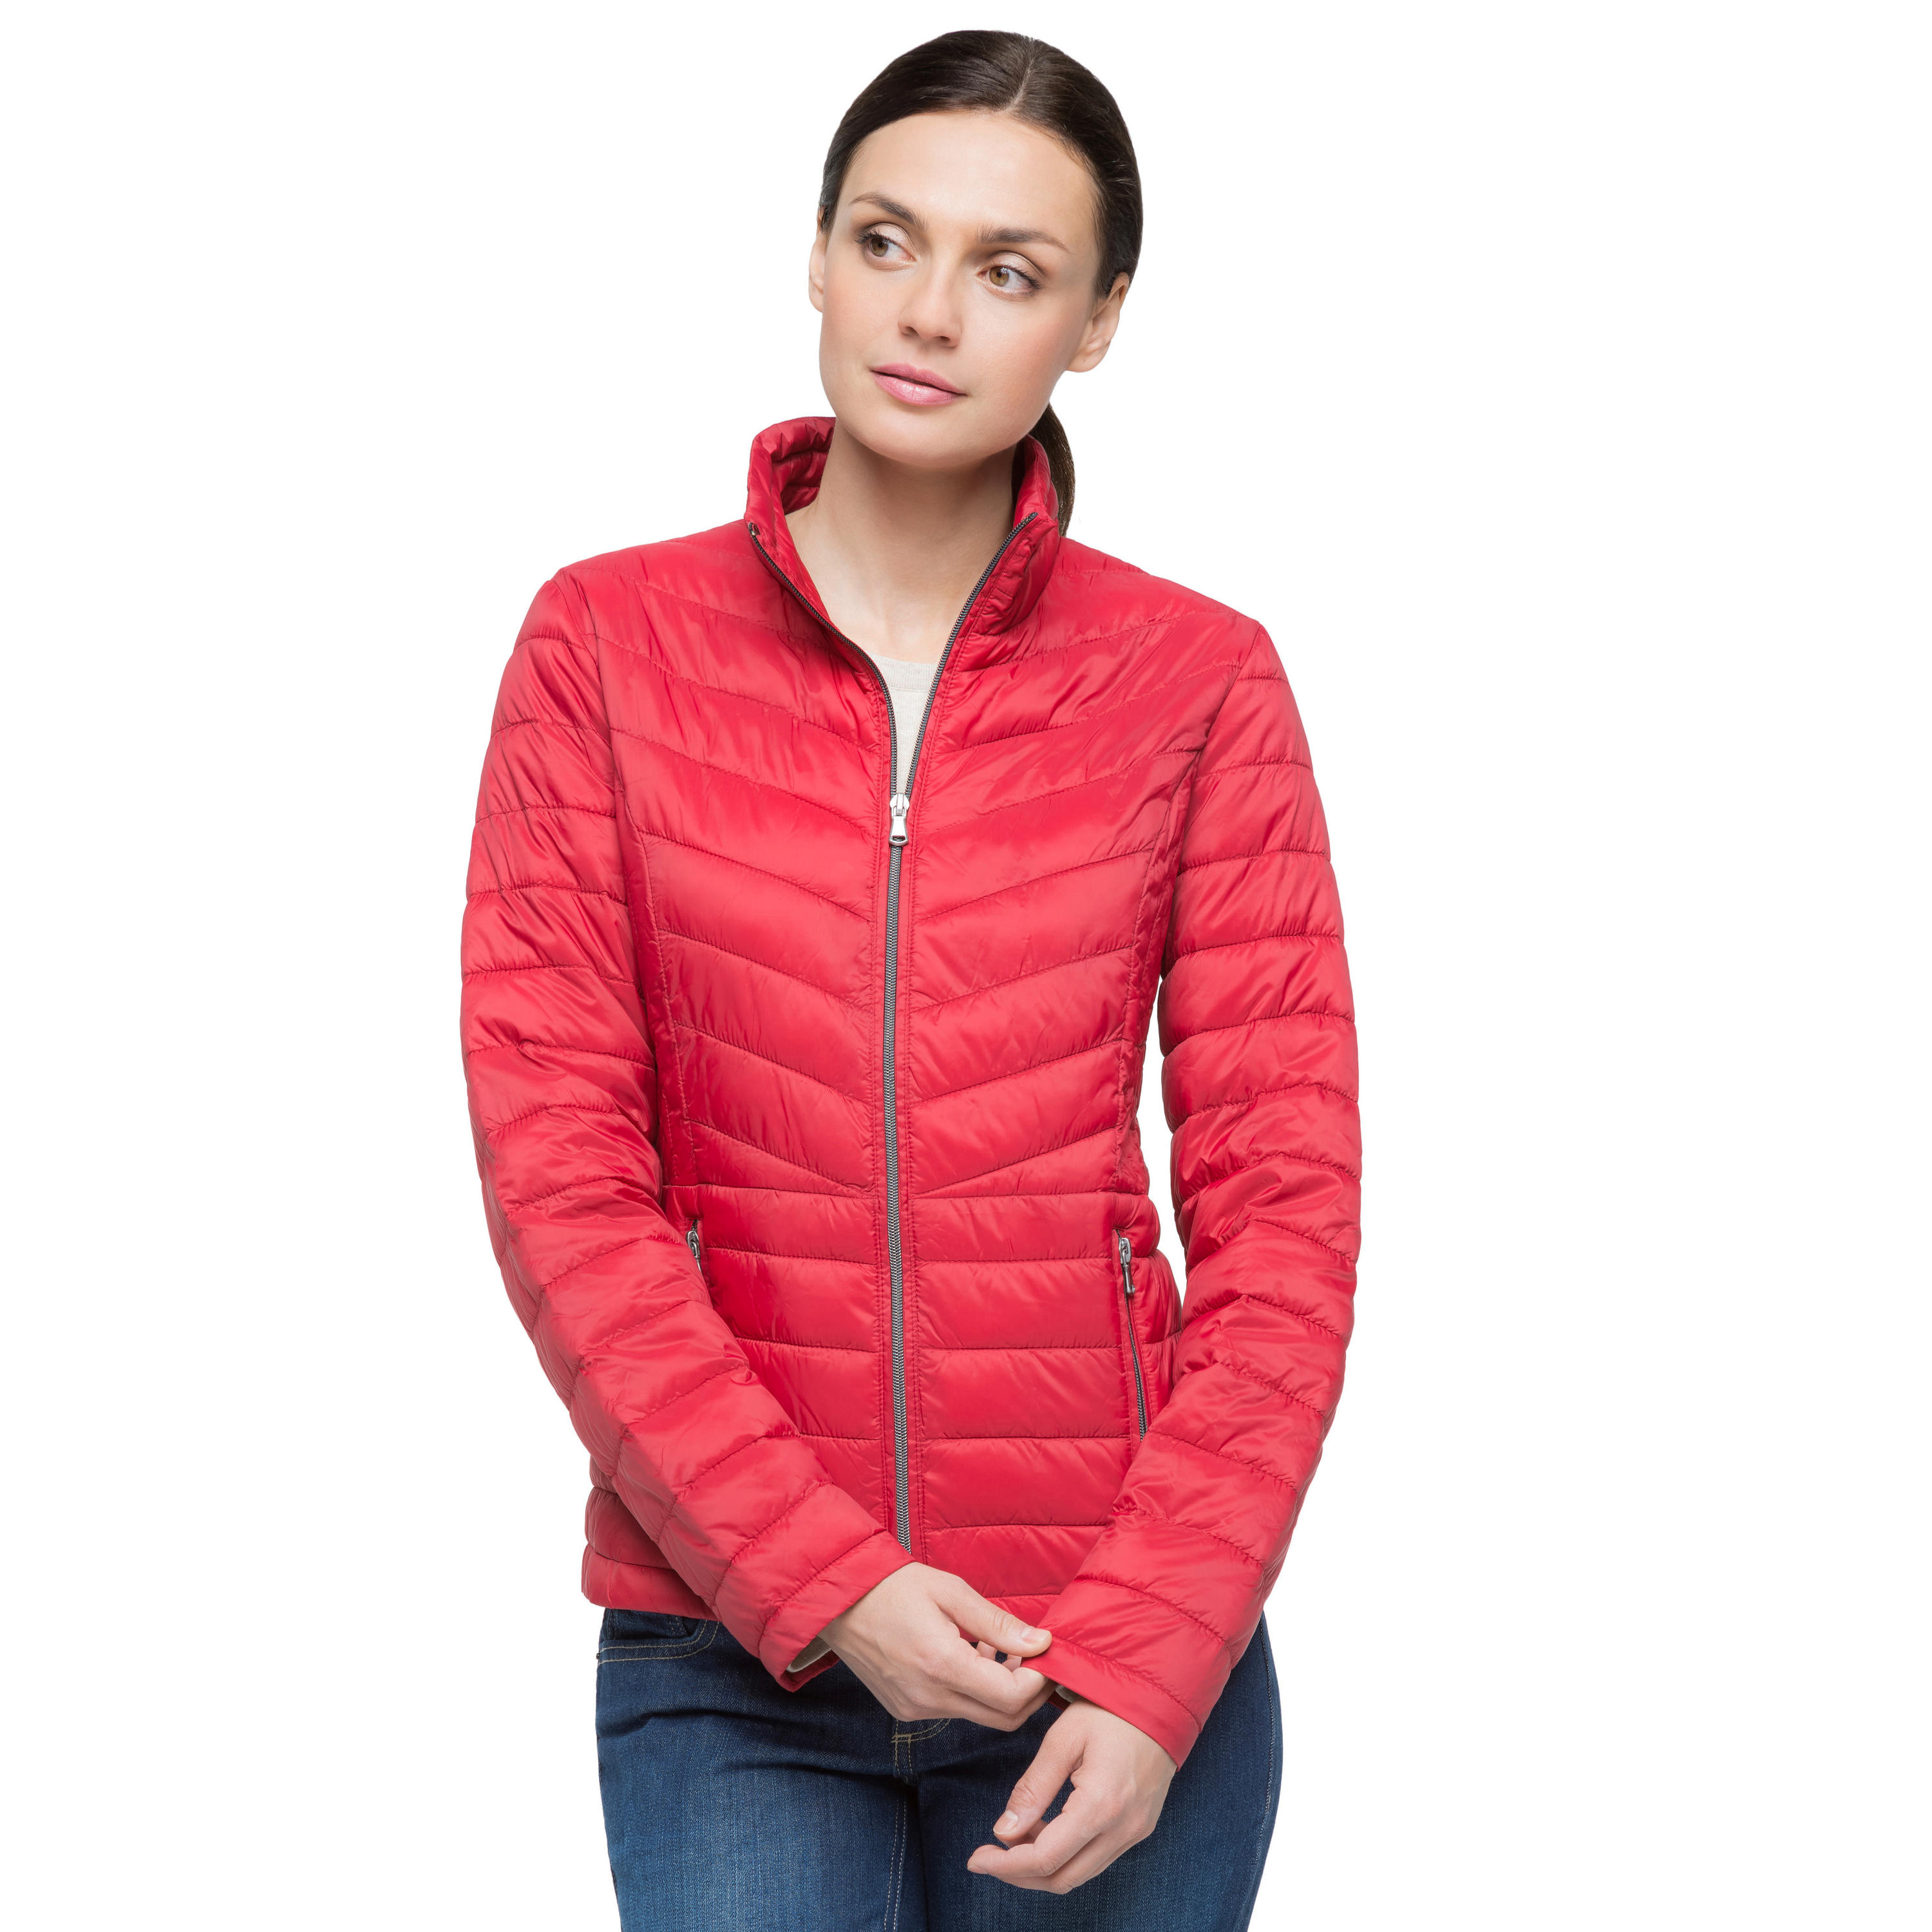 Lyst - G.H. Bass & Co. Packable Puffer Jacket in Red